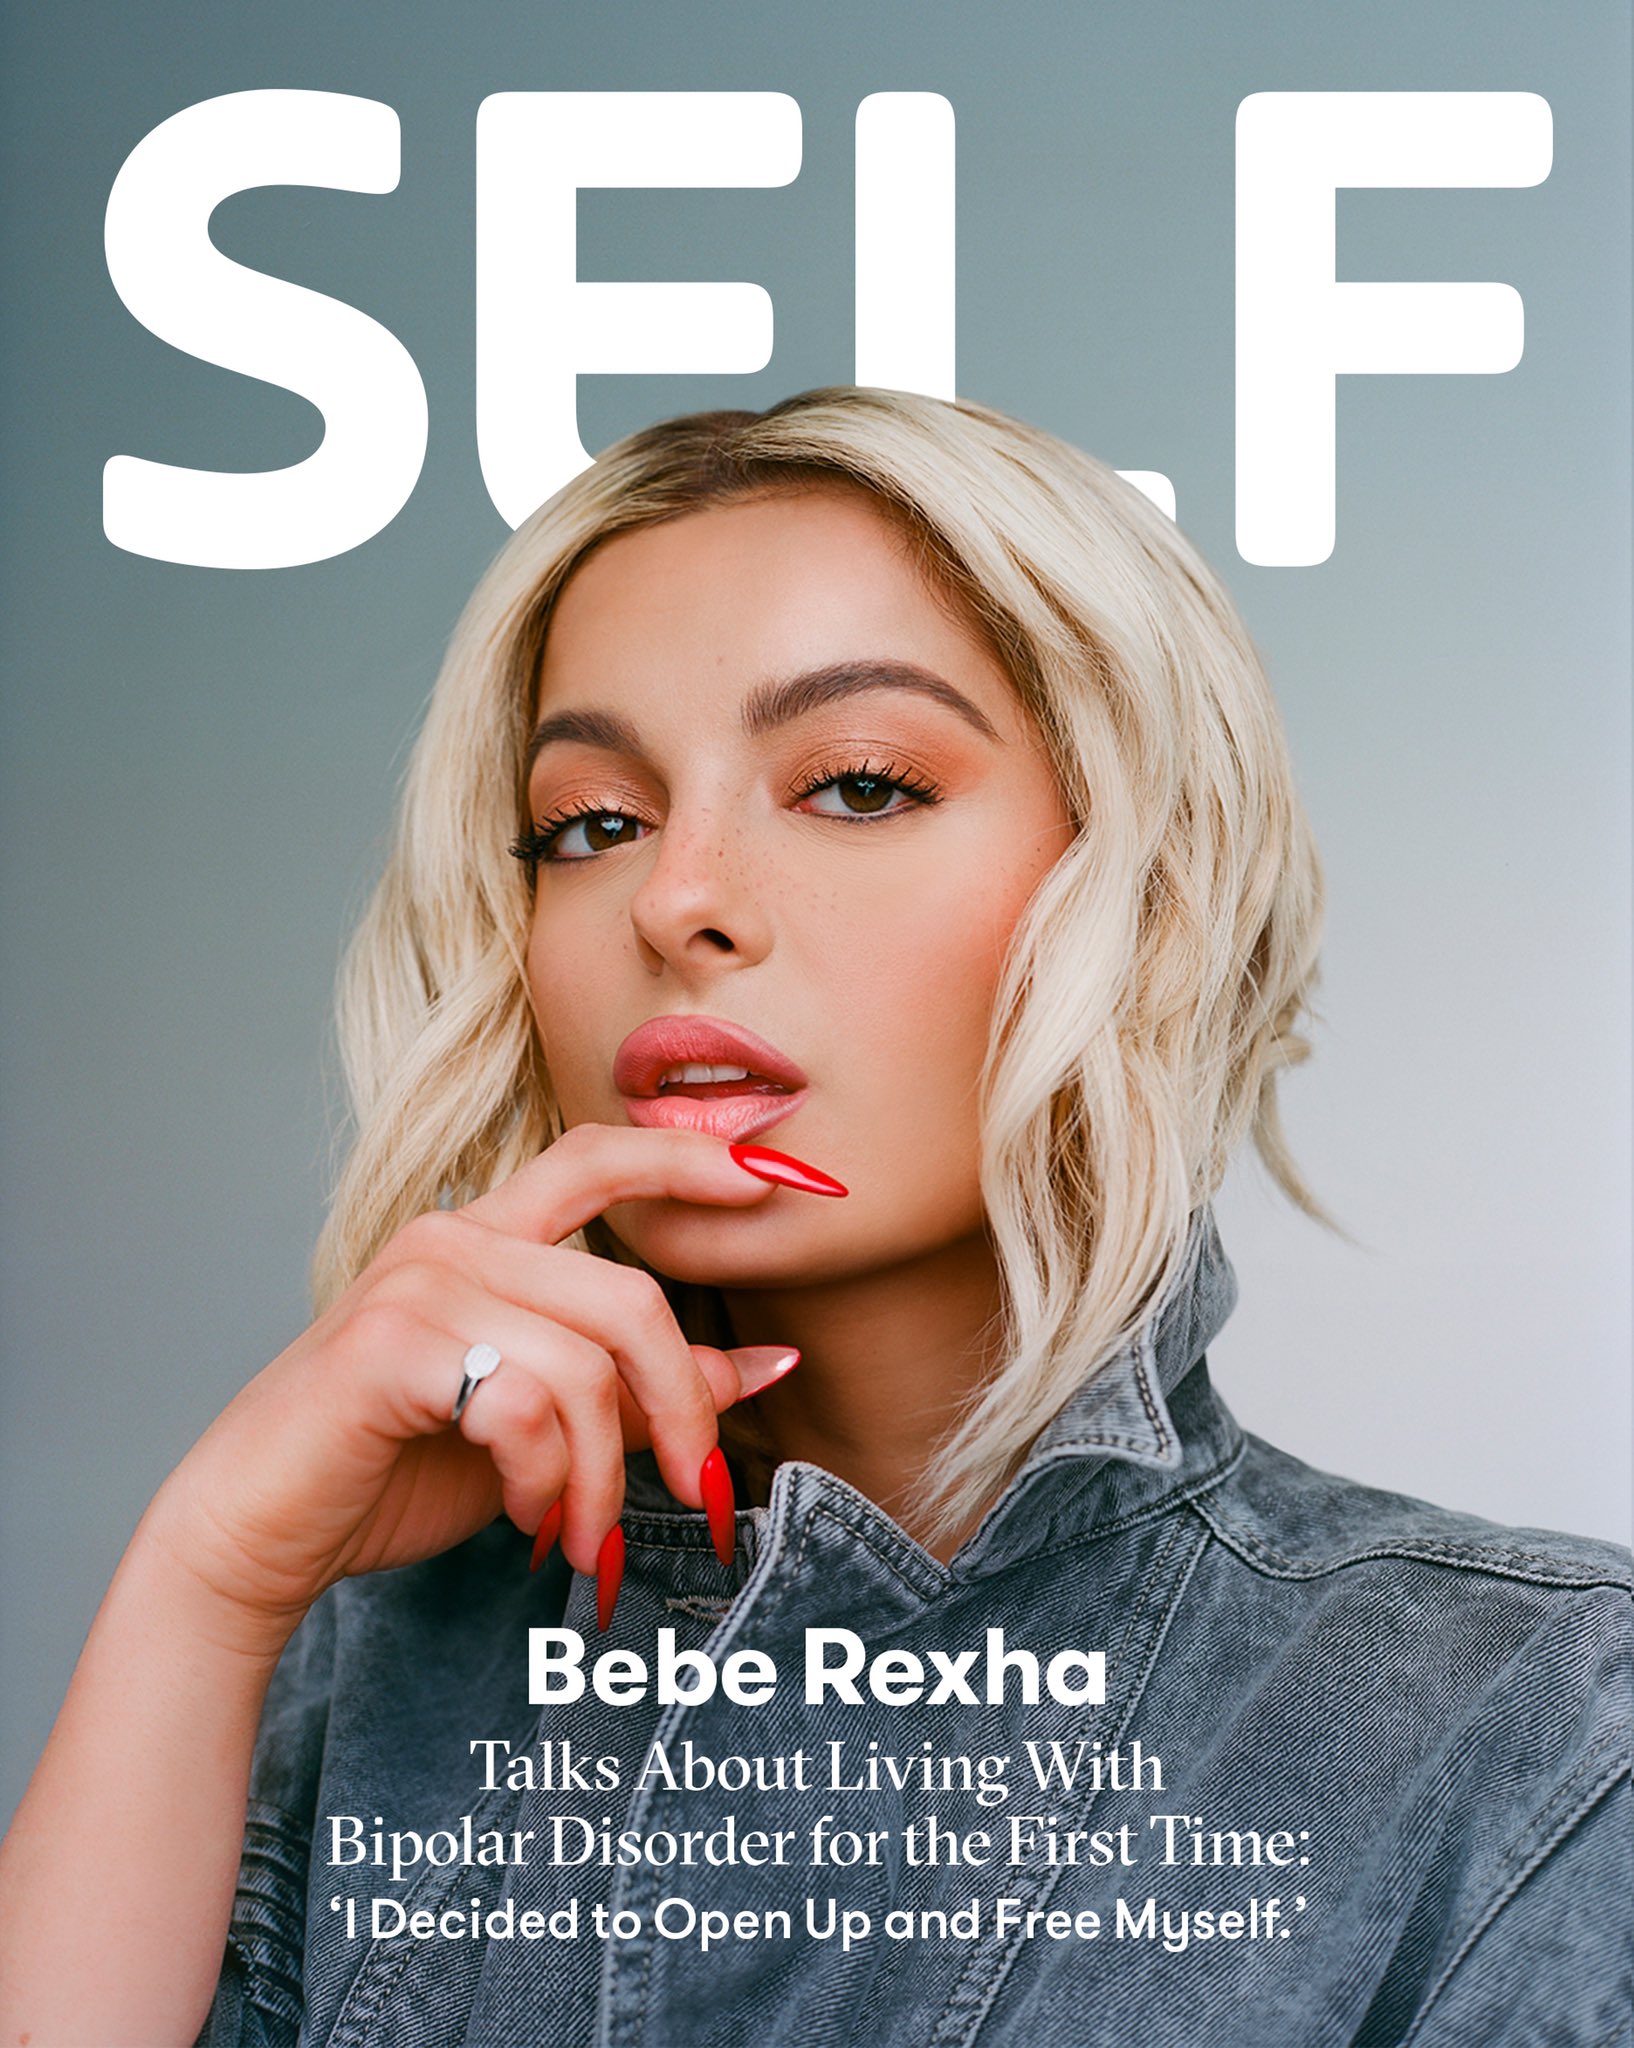 Bebe on cover